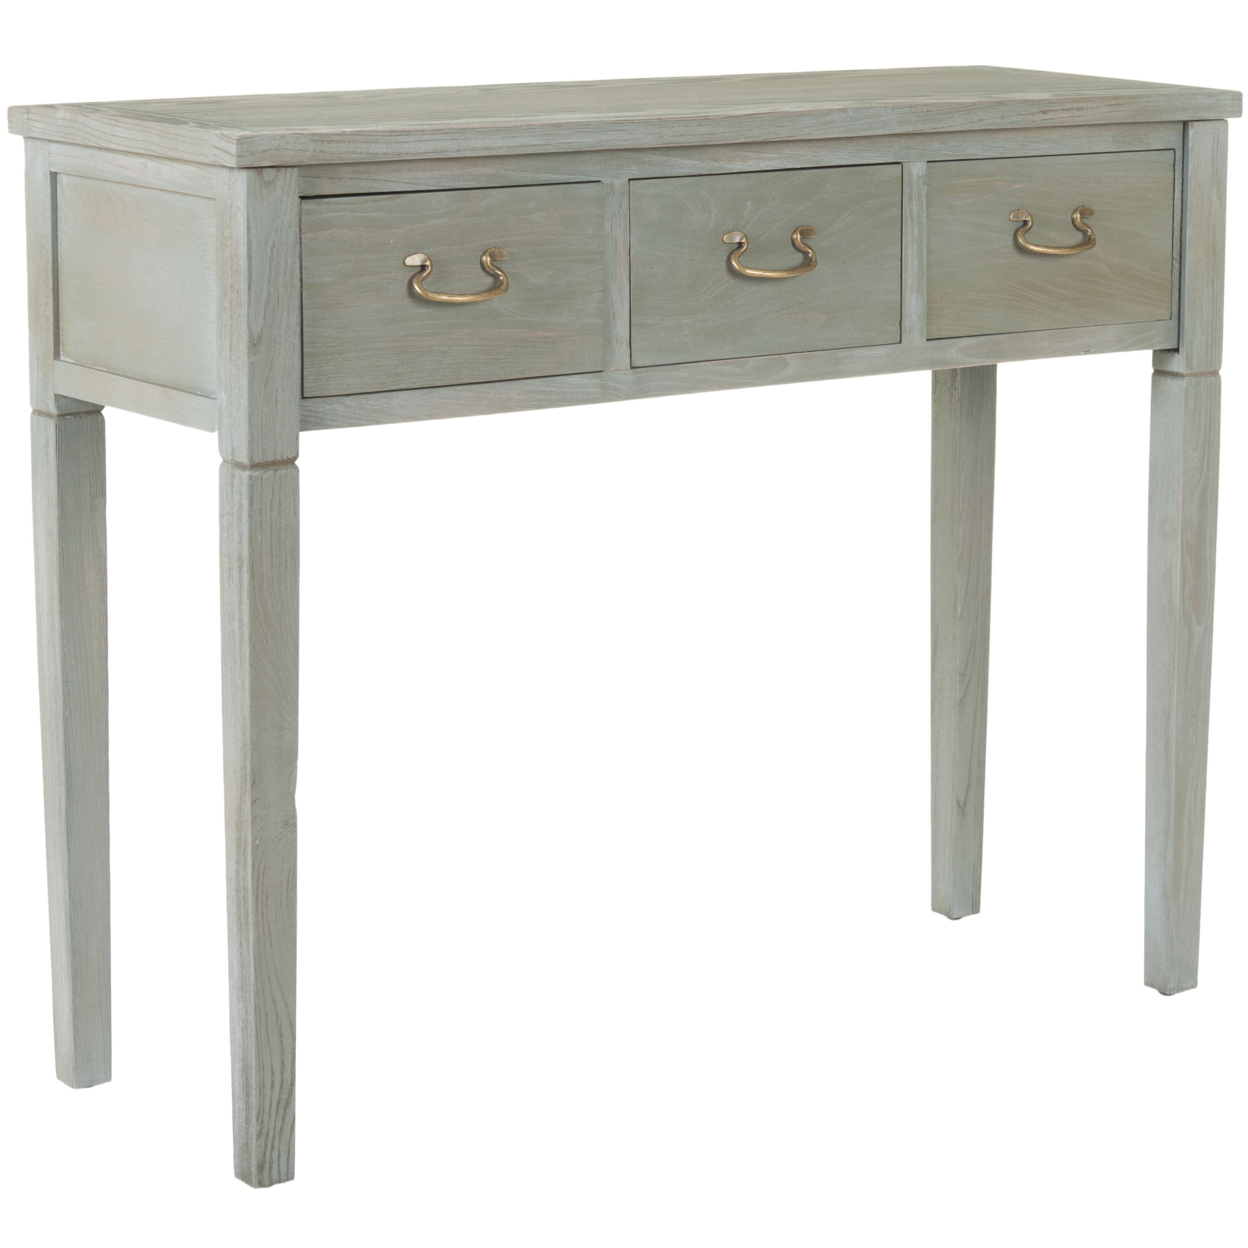 SAFAVIEH Cindy Console Table With Storage Drawers Ash Grey